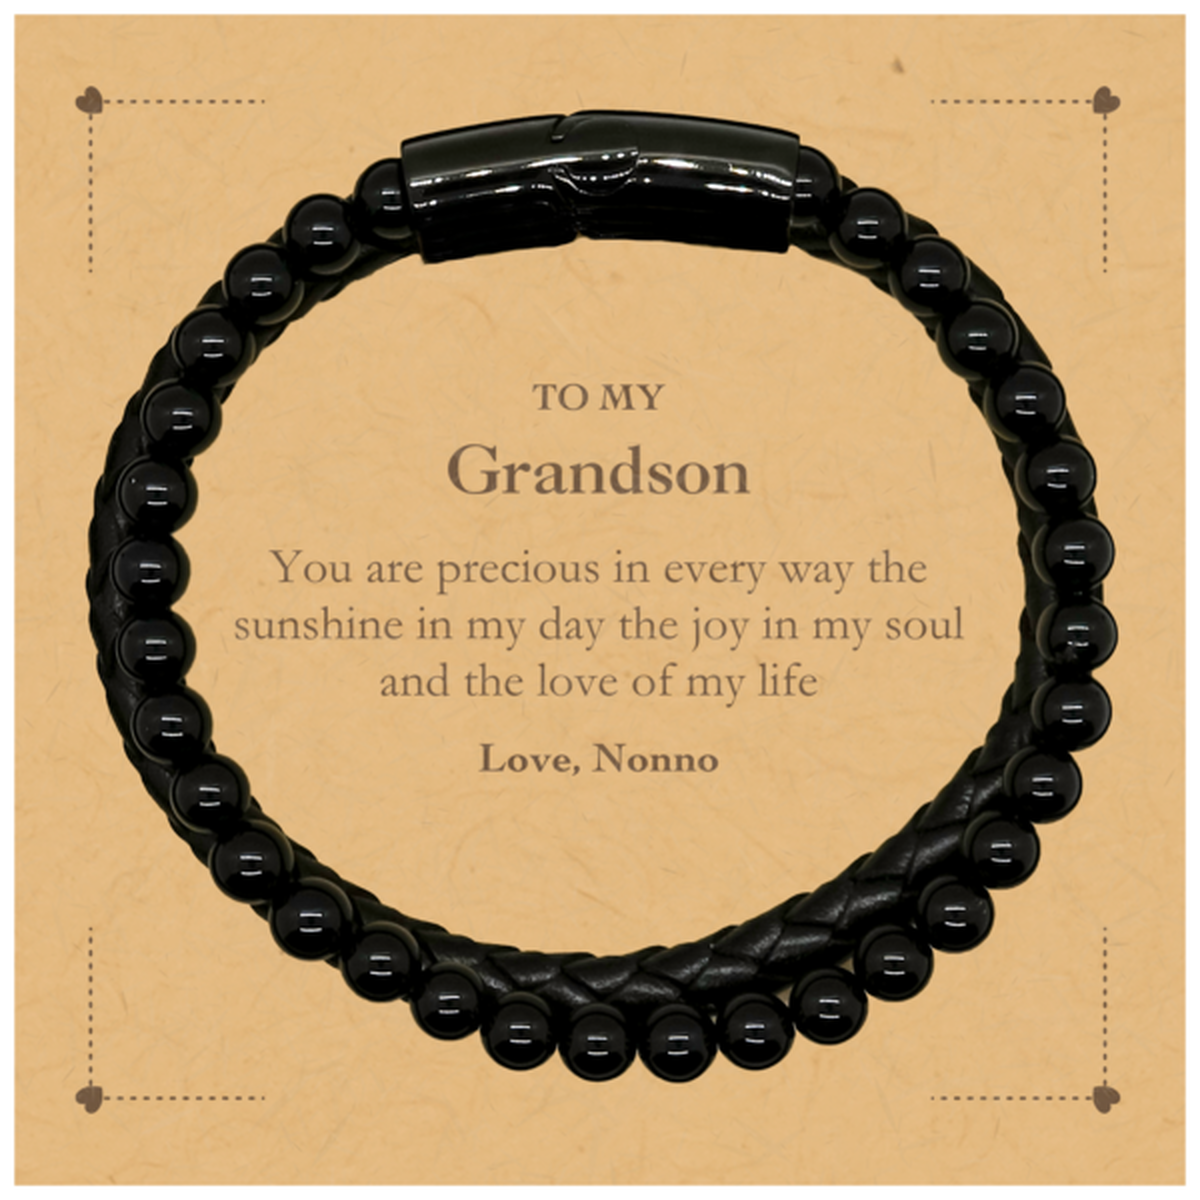 Graduation Gifts for Grandson Stone Leather Bracelets Present from Nonno, Christmas Grandson Birthday Gifts Grandson You are precious in every way the sunshine in my day. Love, Nonno